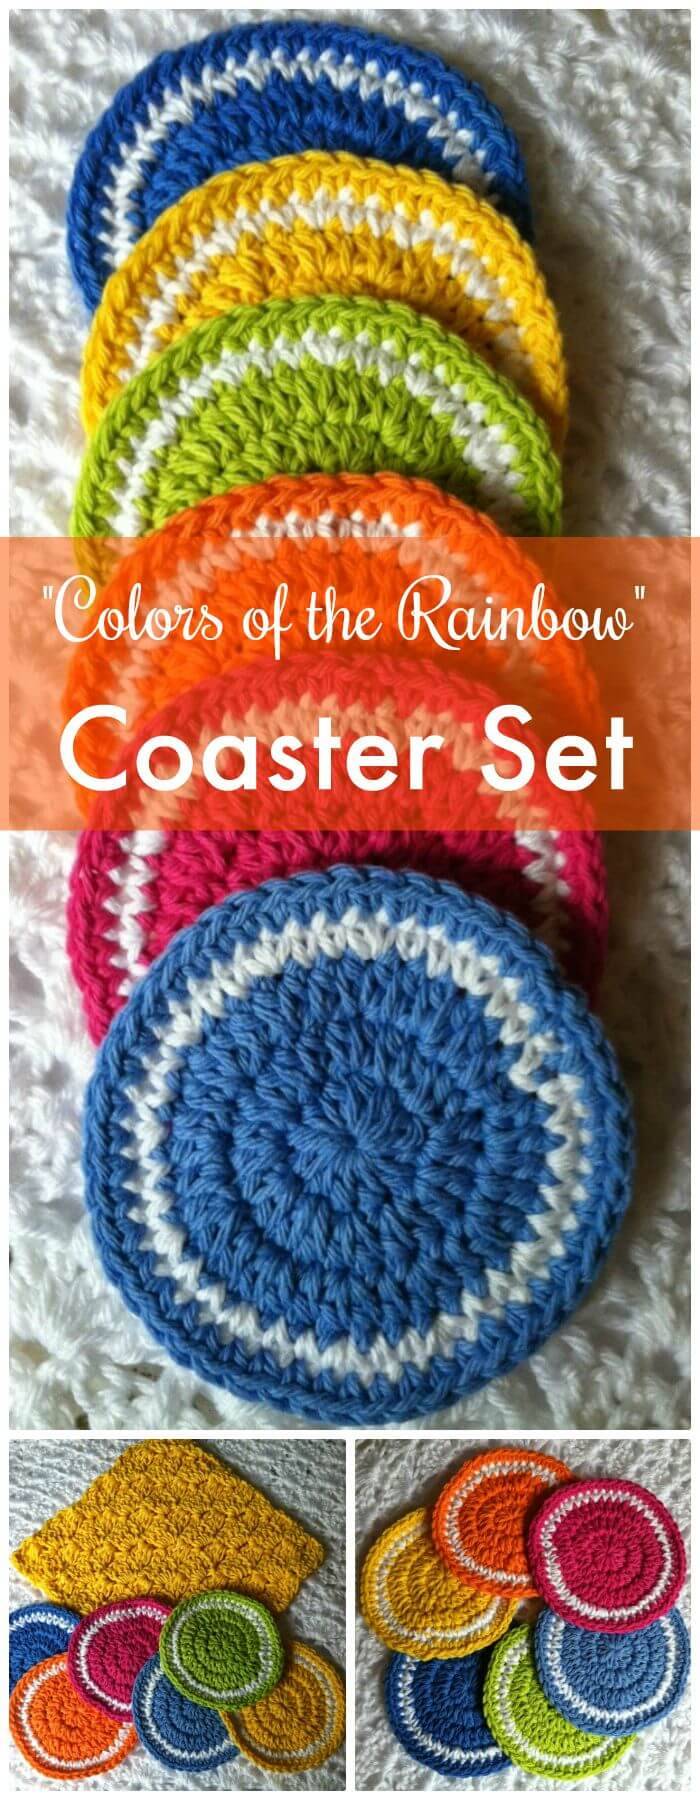 DIY Colors of the Rainbow Coaster Set Set of 6 Crochet Coasters, Quick and easy crochet coasters with complete free patterns!